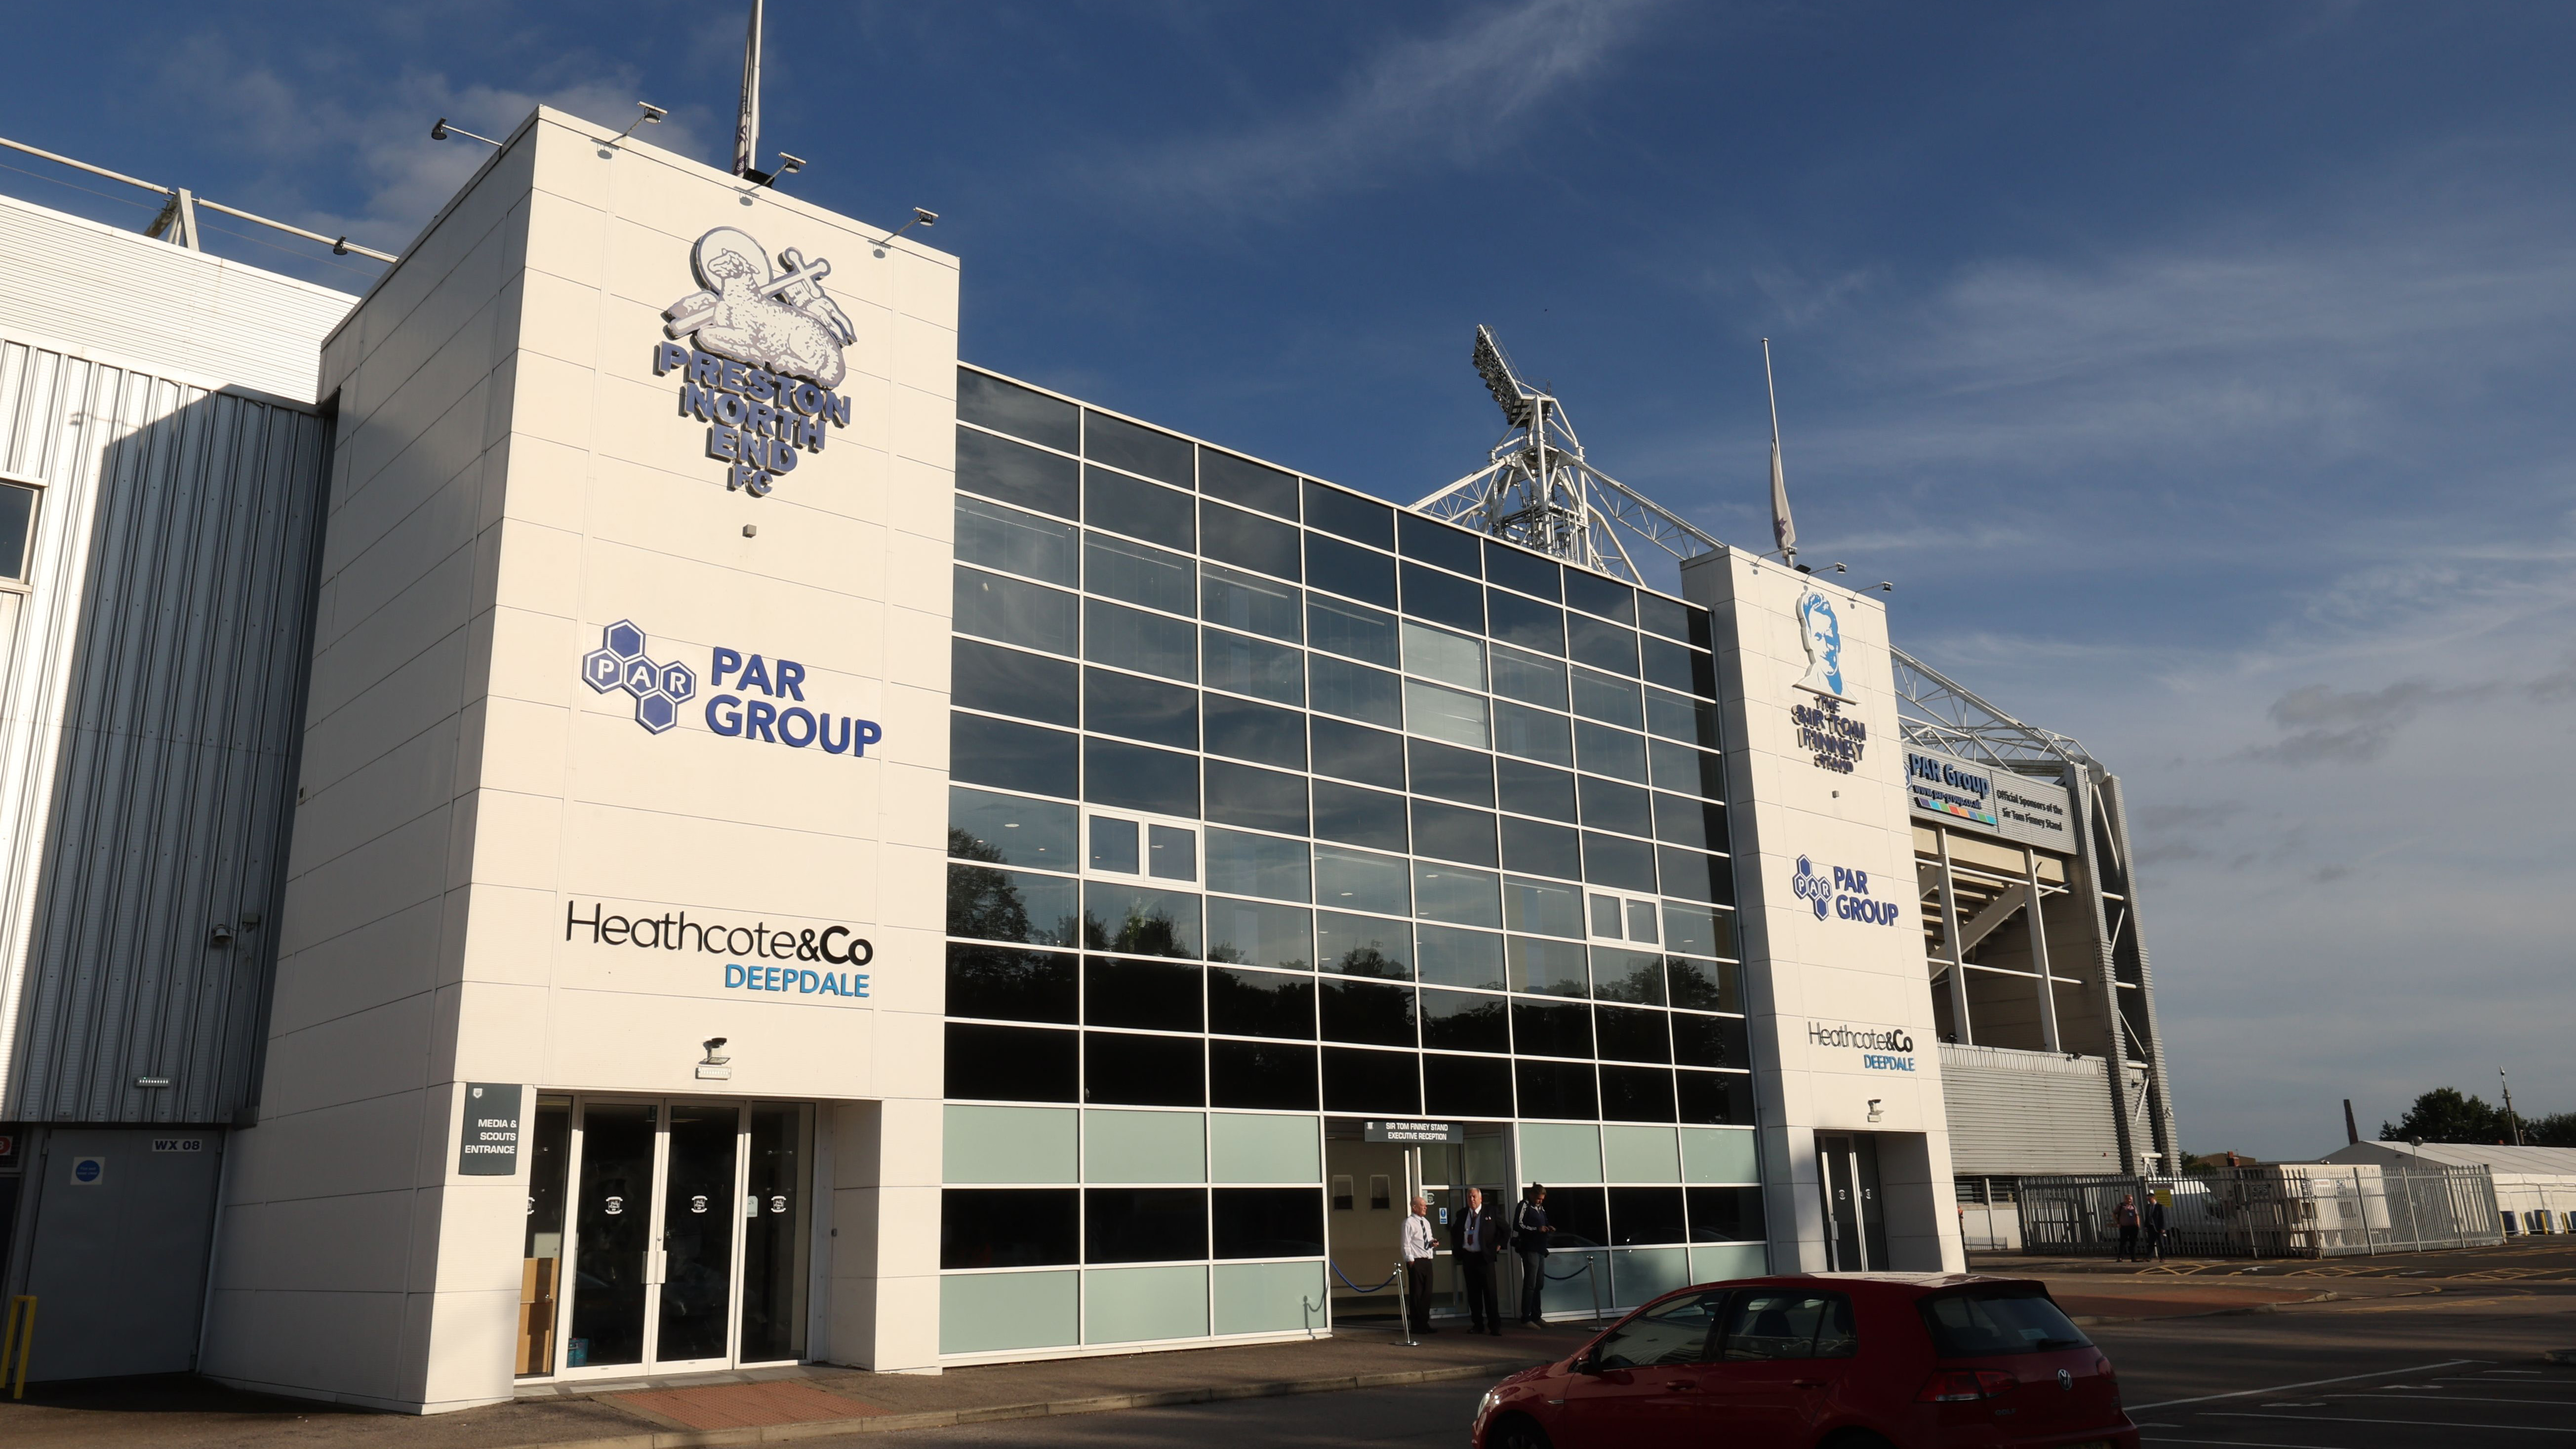 Club Shop Set To Close End Of May - News - Preston North End